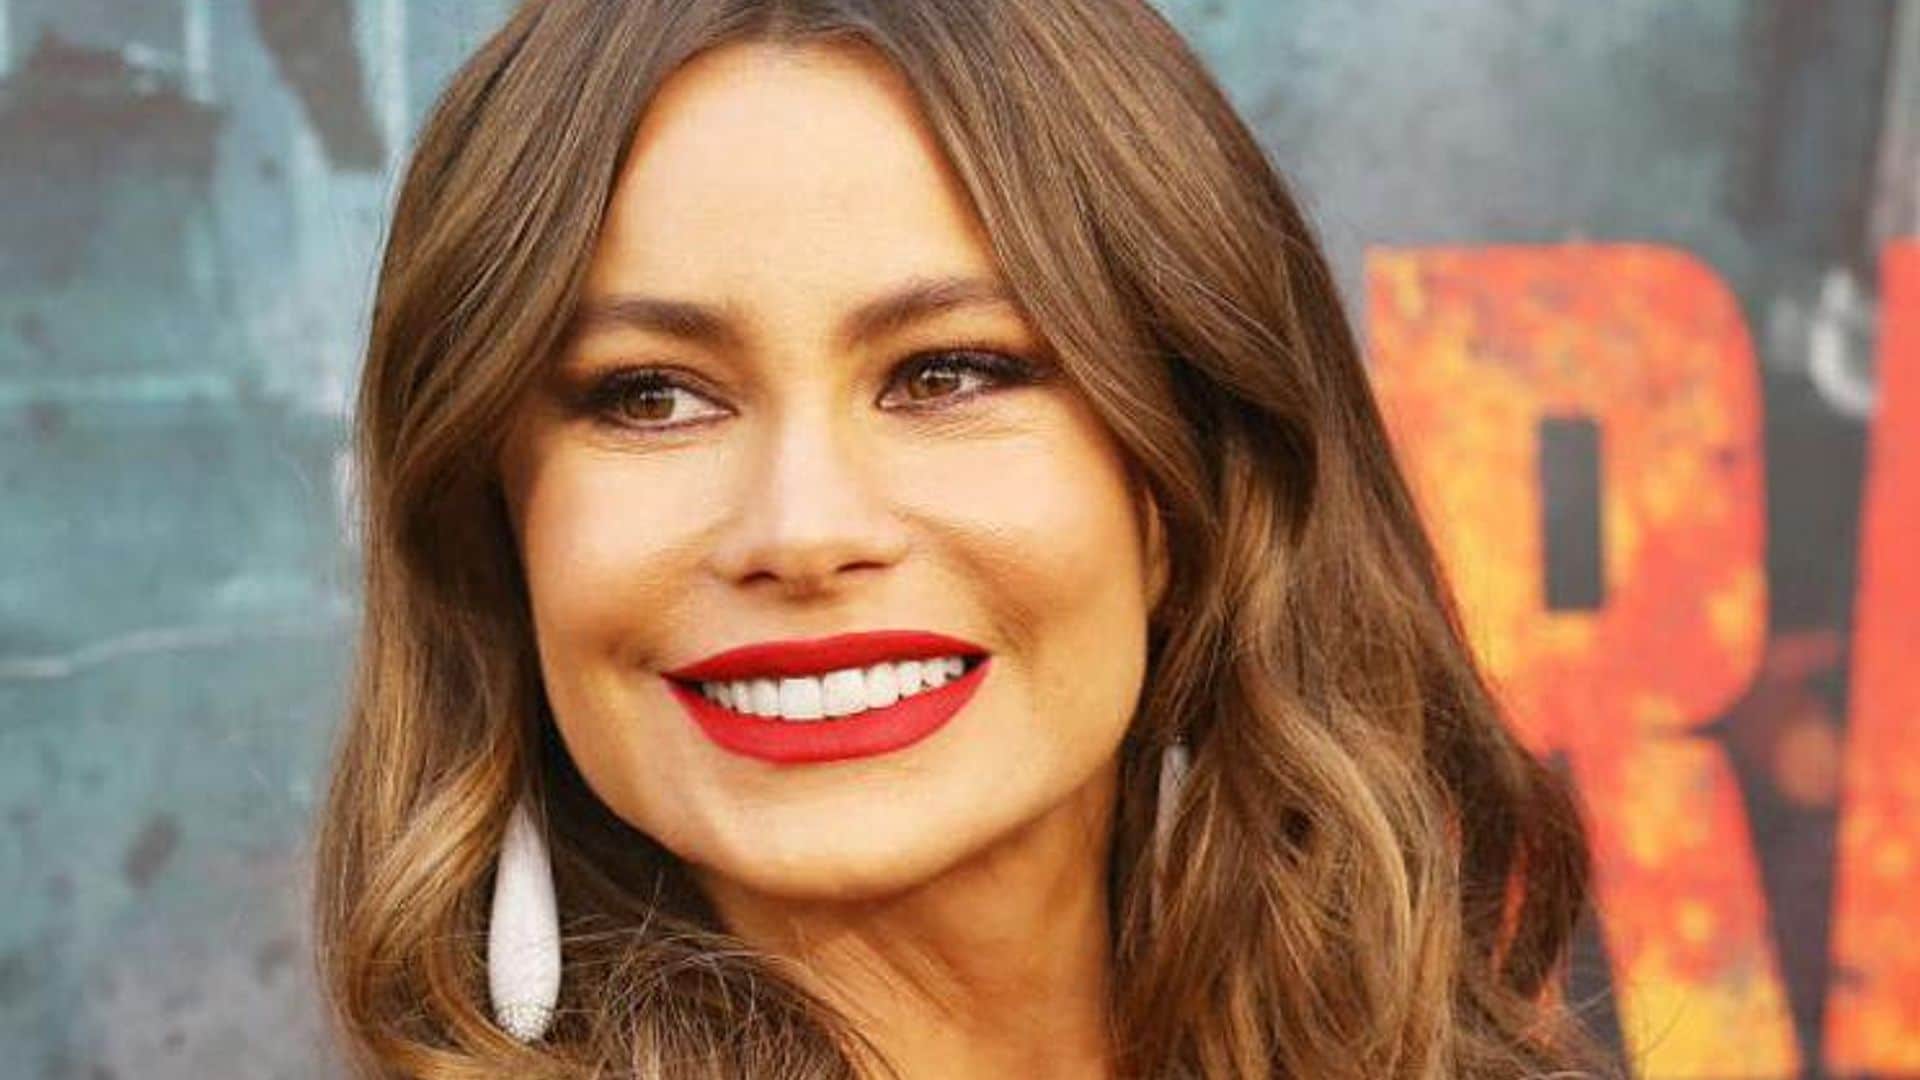 How Sofia Vergara became one of the highest-earning women in entertainment